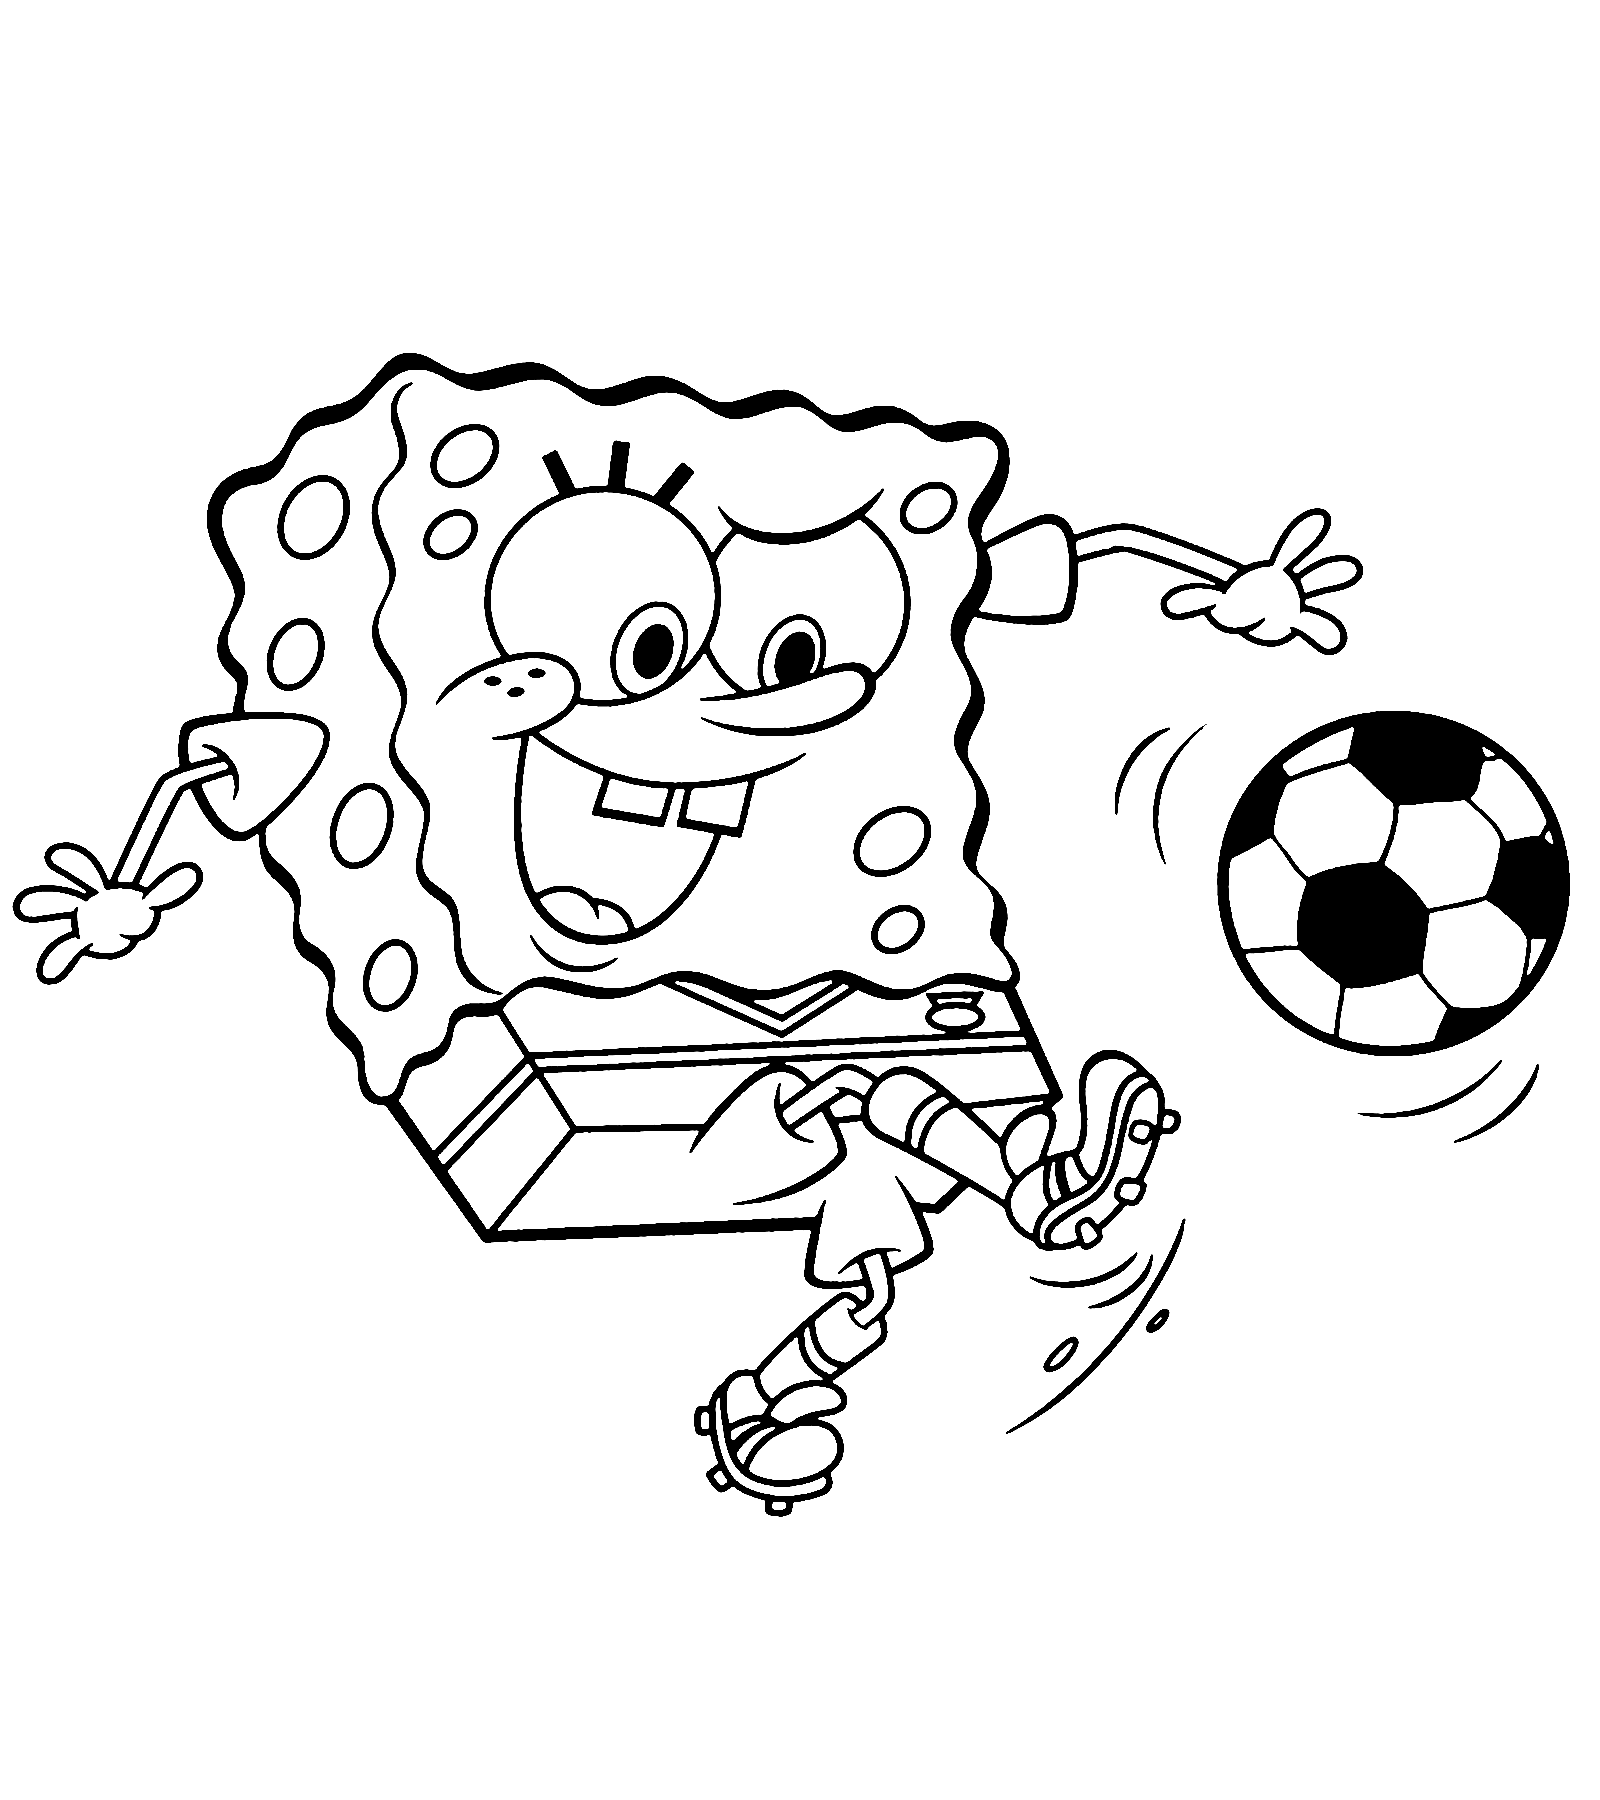 Soccer fun with Cute Spongebob Easy Coloring Page for Kids